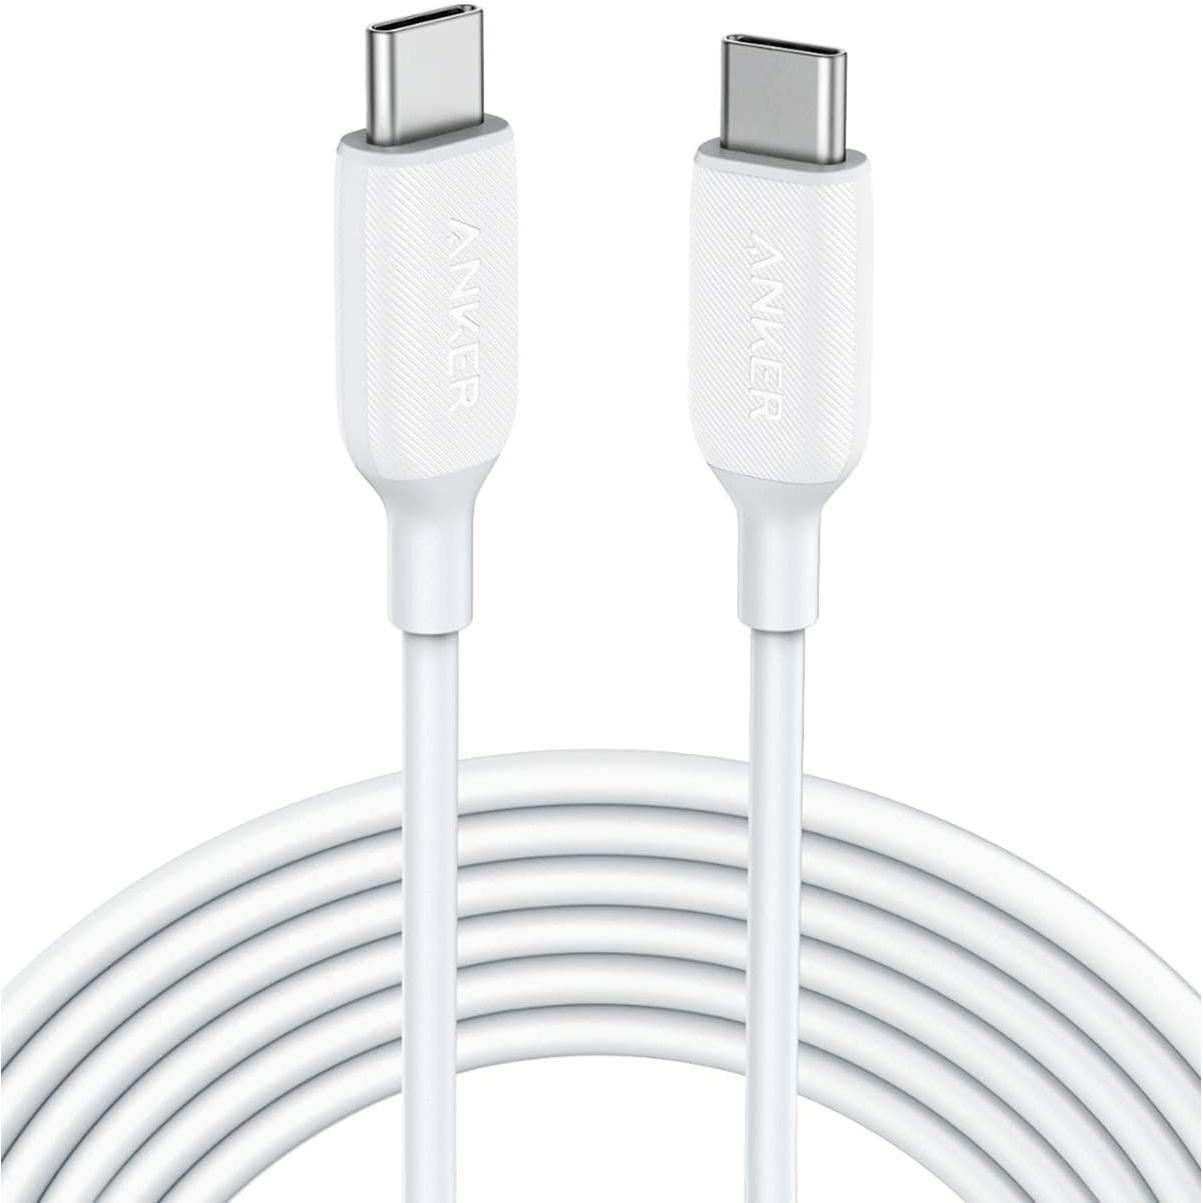 10ft Anker Powerline III 60W USB-C to USB-C Charger Cable for $9.99